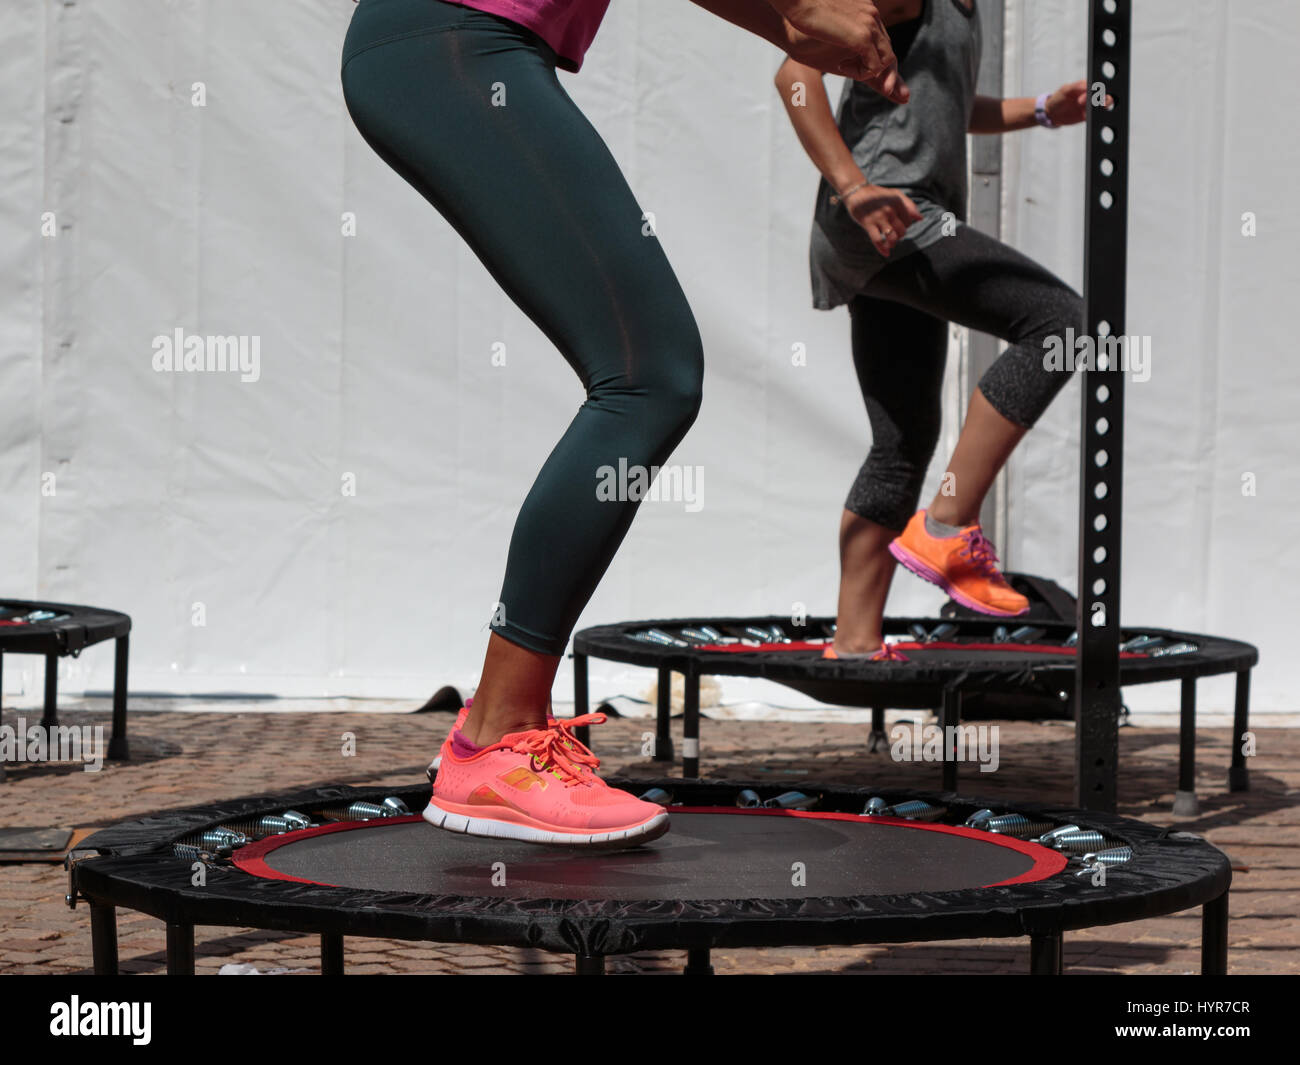 Mini Trampoline Workout: Girl doing Fitness in Class at Gym Stock Photo - Alamy